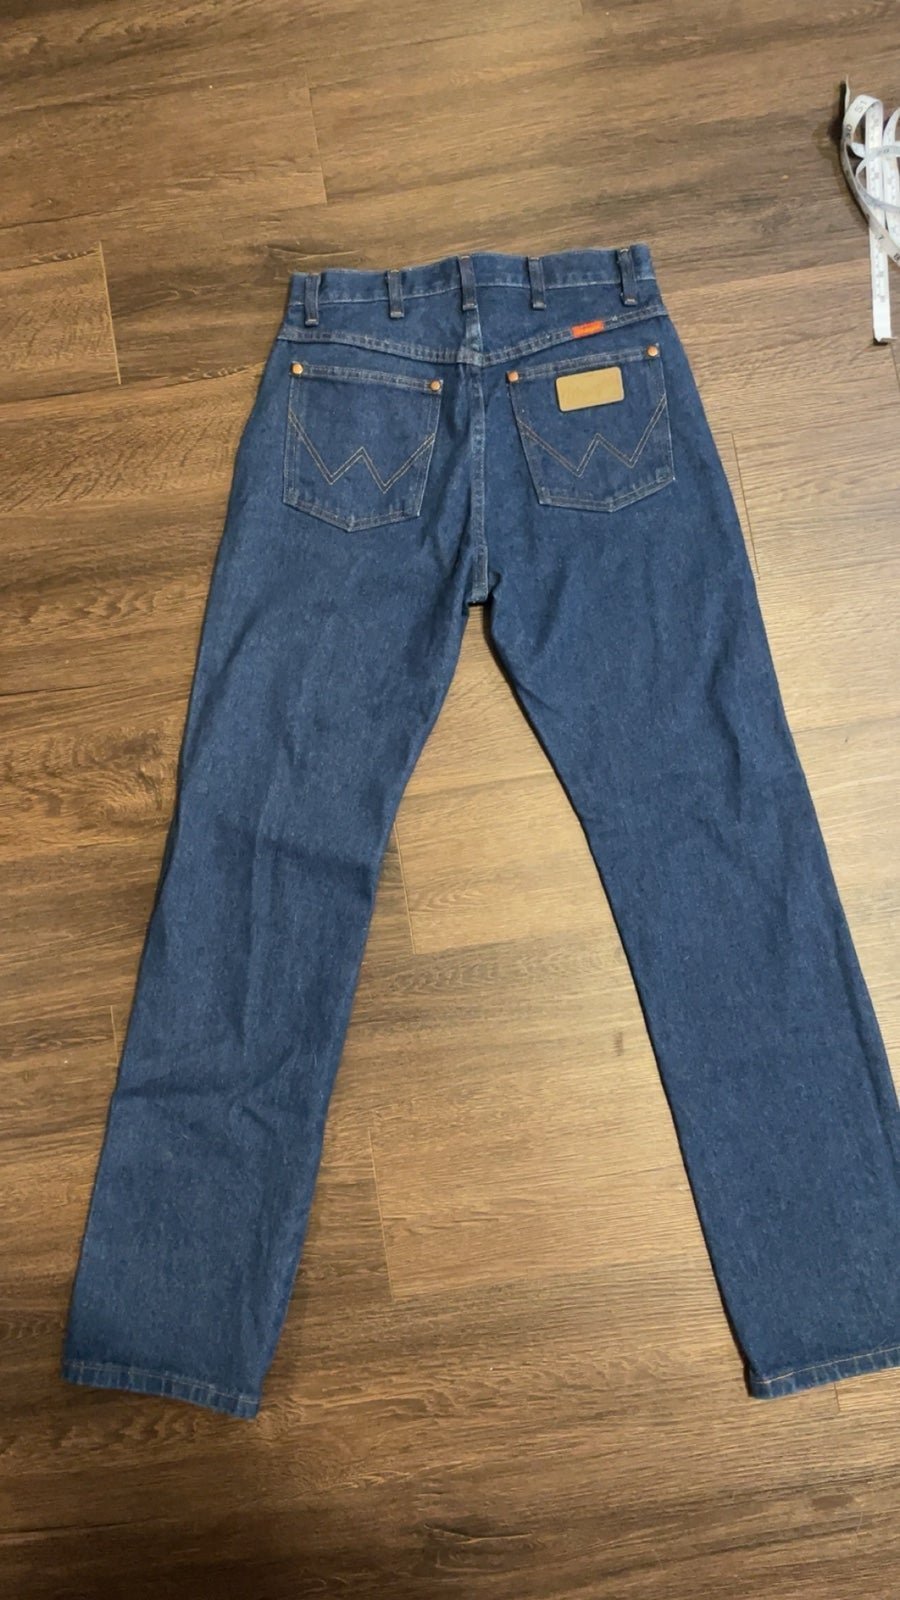 Gorgeous New Never Worn Wrangler Cowboy Cut Dark Wash Jeans Size 5 x 32” OFFERS WELCOME OZVNSFKKS Discount